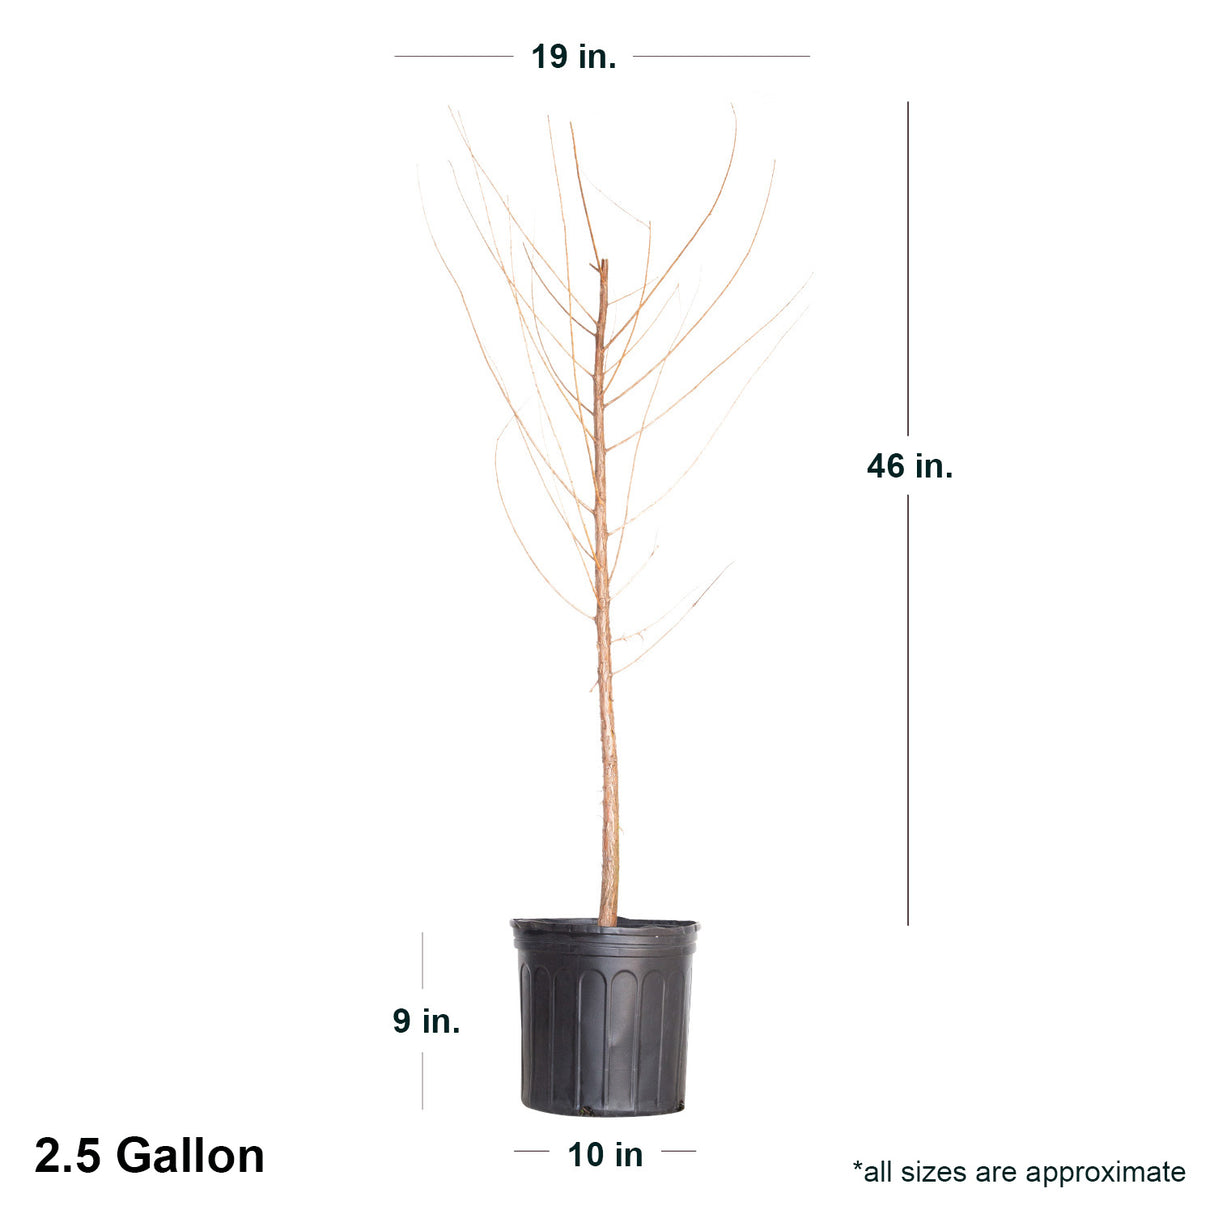 2.4 Gallon Bald Cypress Tree dormant in black container showing dimensions.